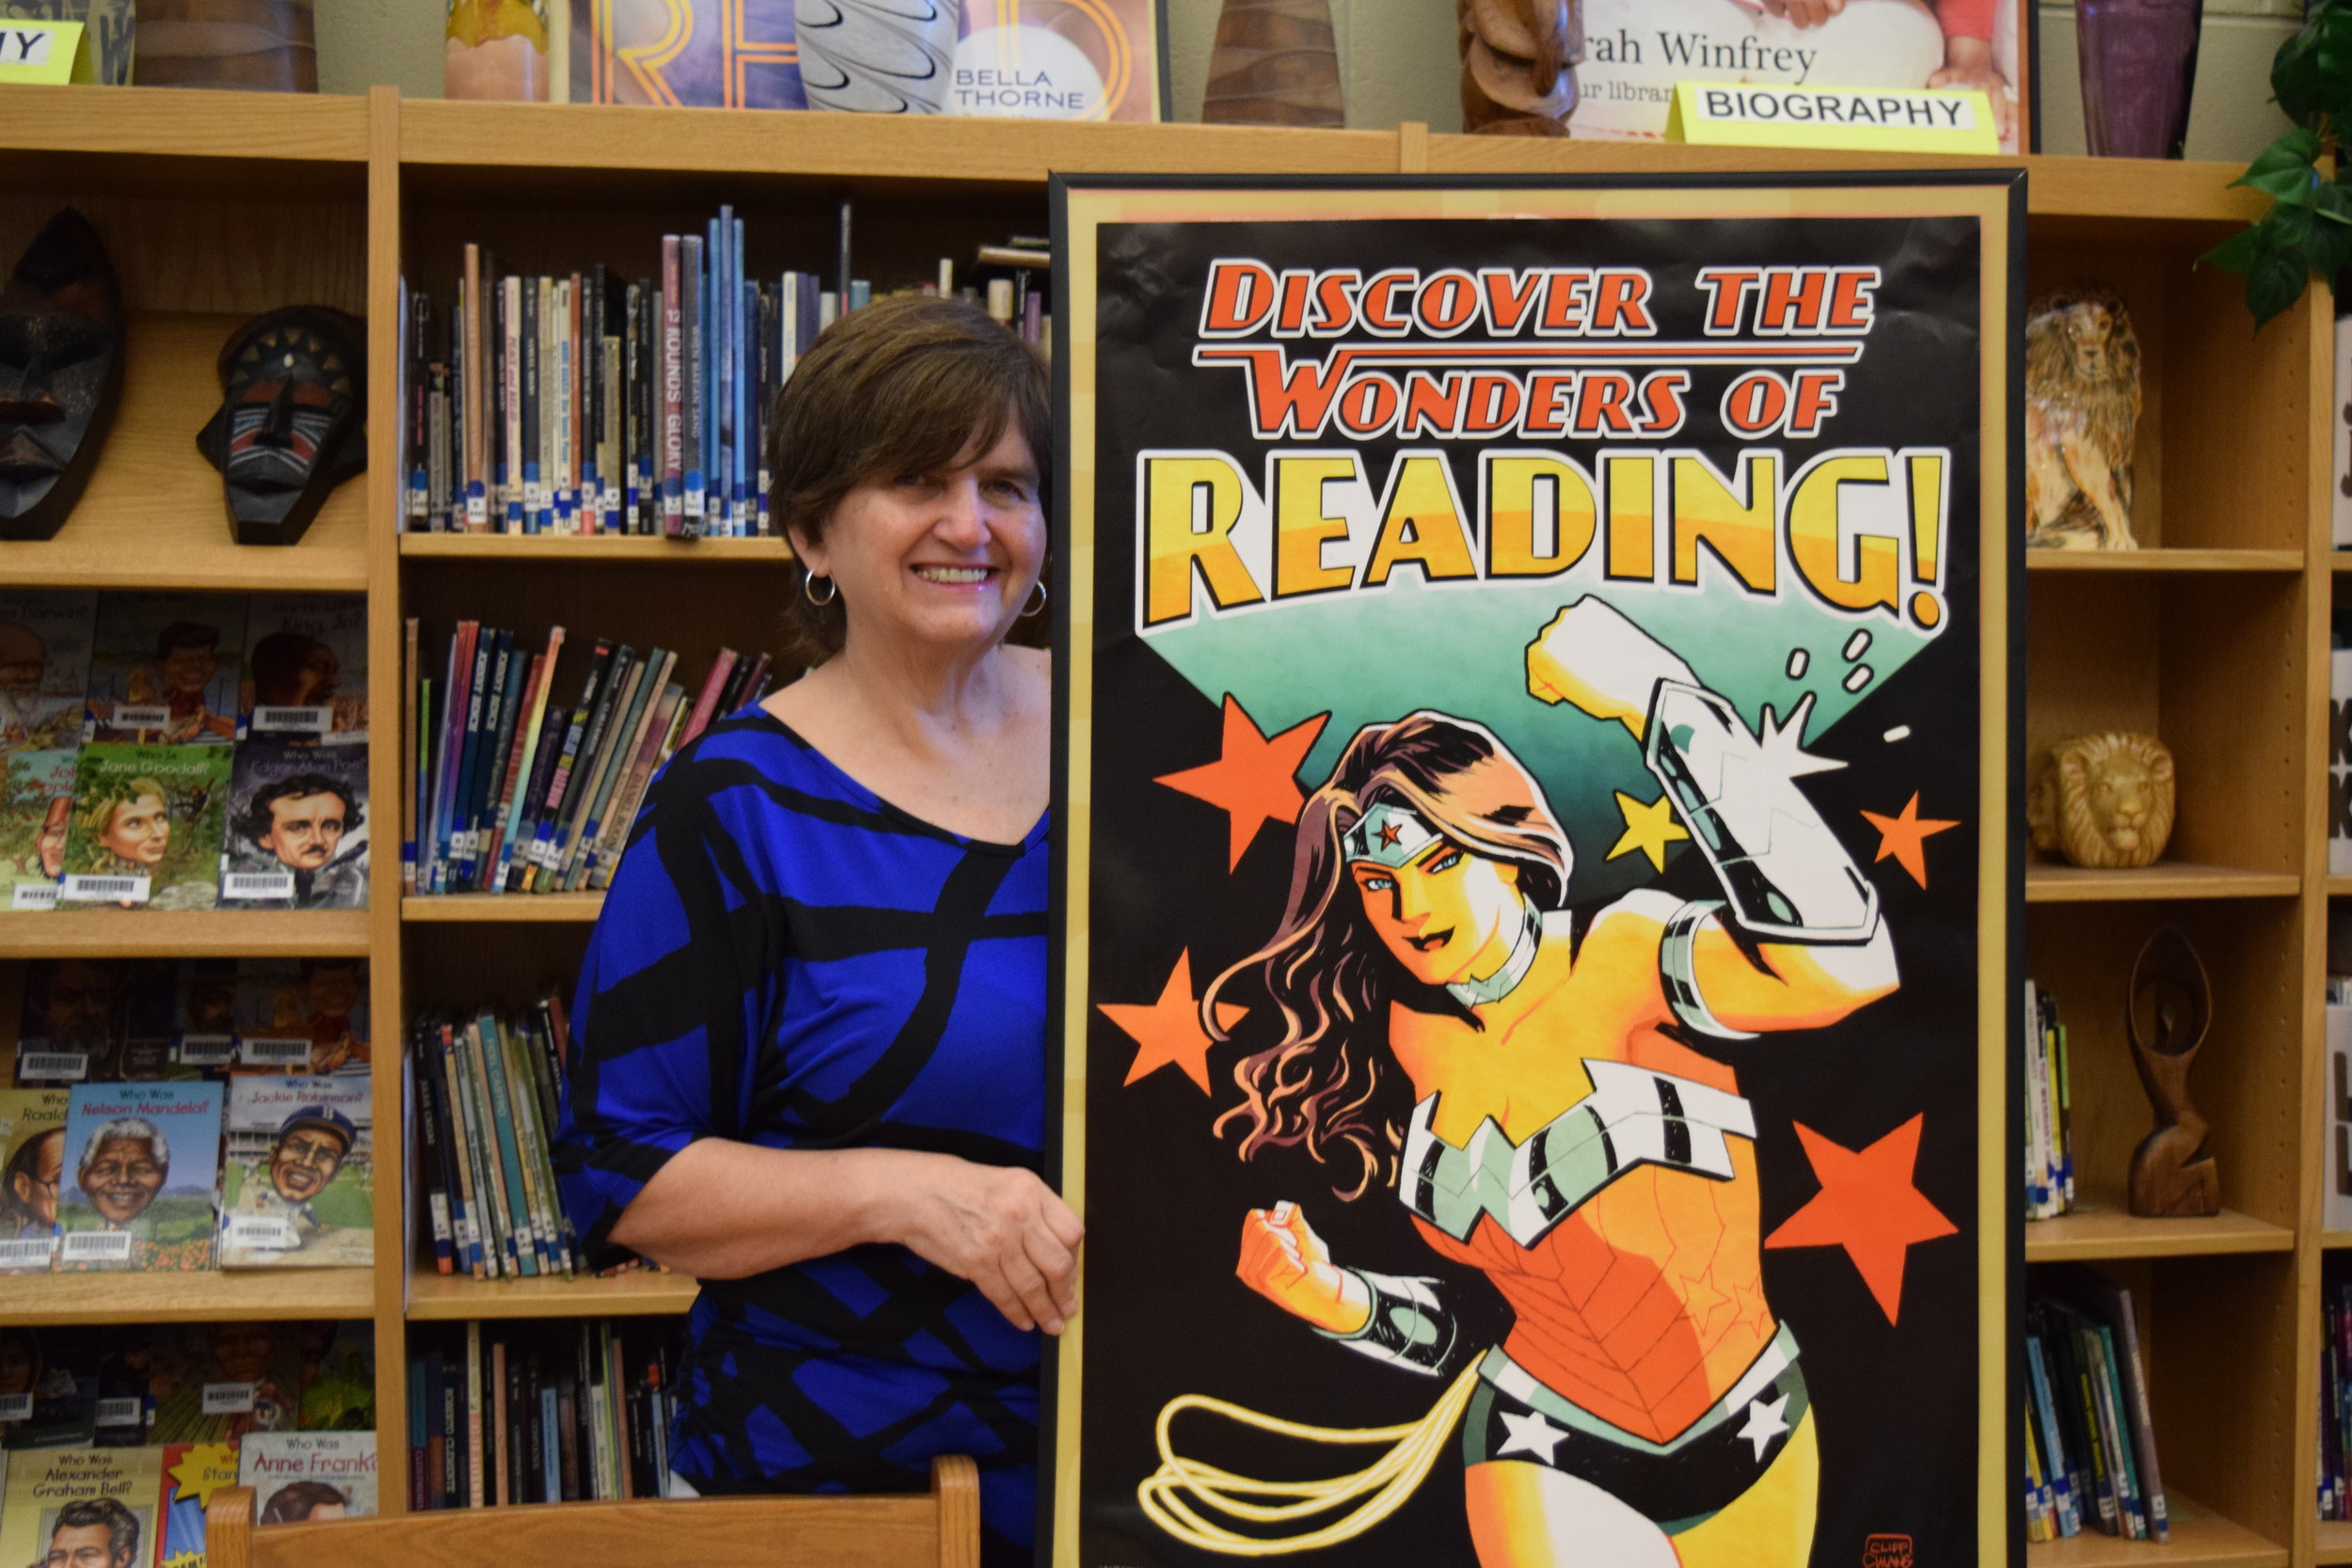 Sue Norman, Foley Middle School Librarian, is one of the 13 winners of Capstone’s “The Power of Librarians” contest. Her winning photo will appear in Capstone’s 2018 calendar.